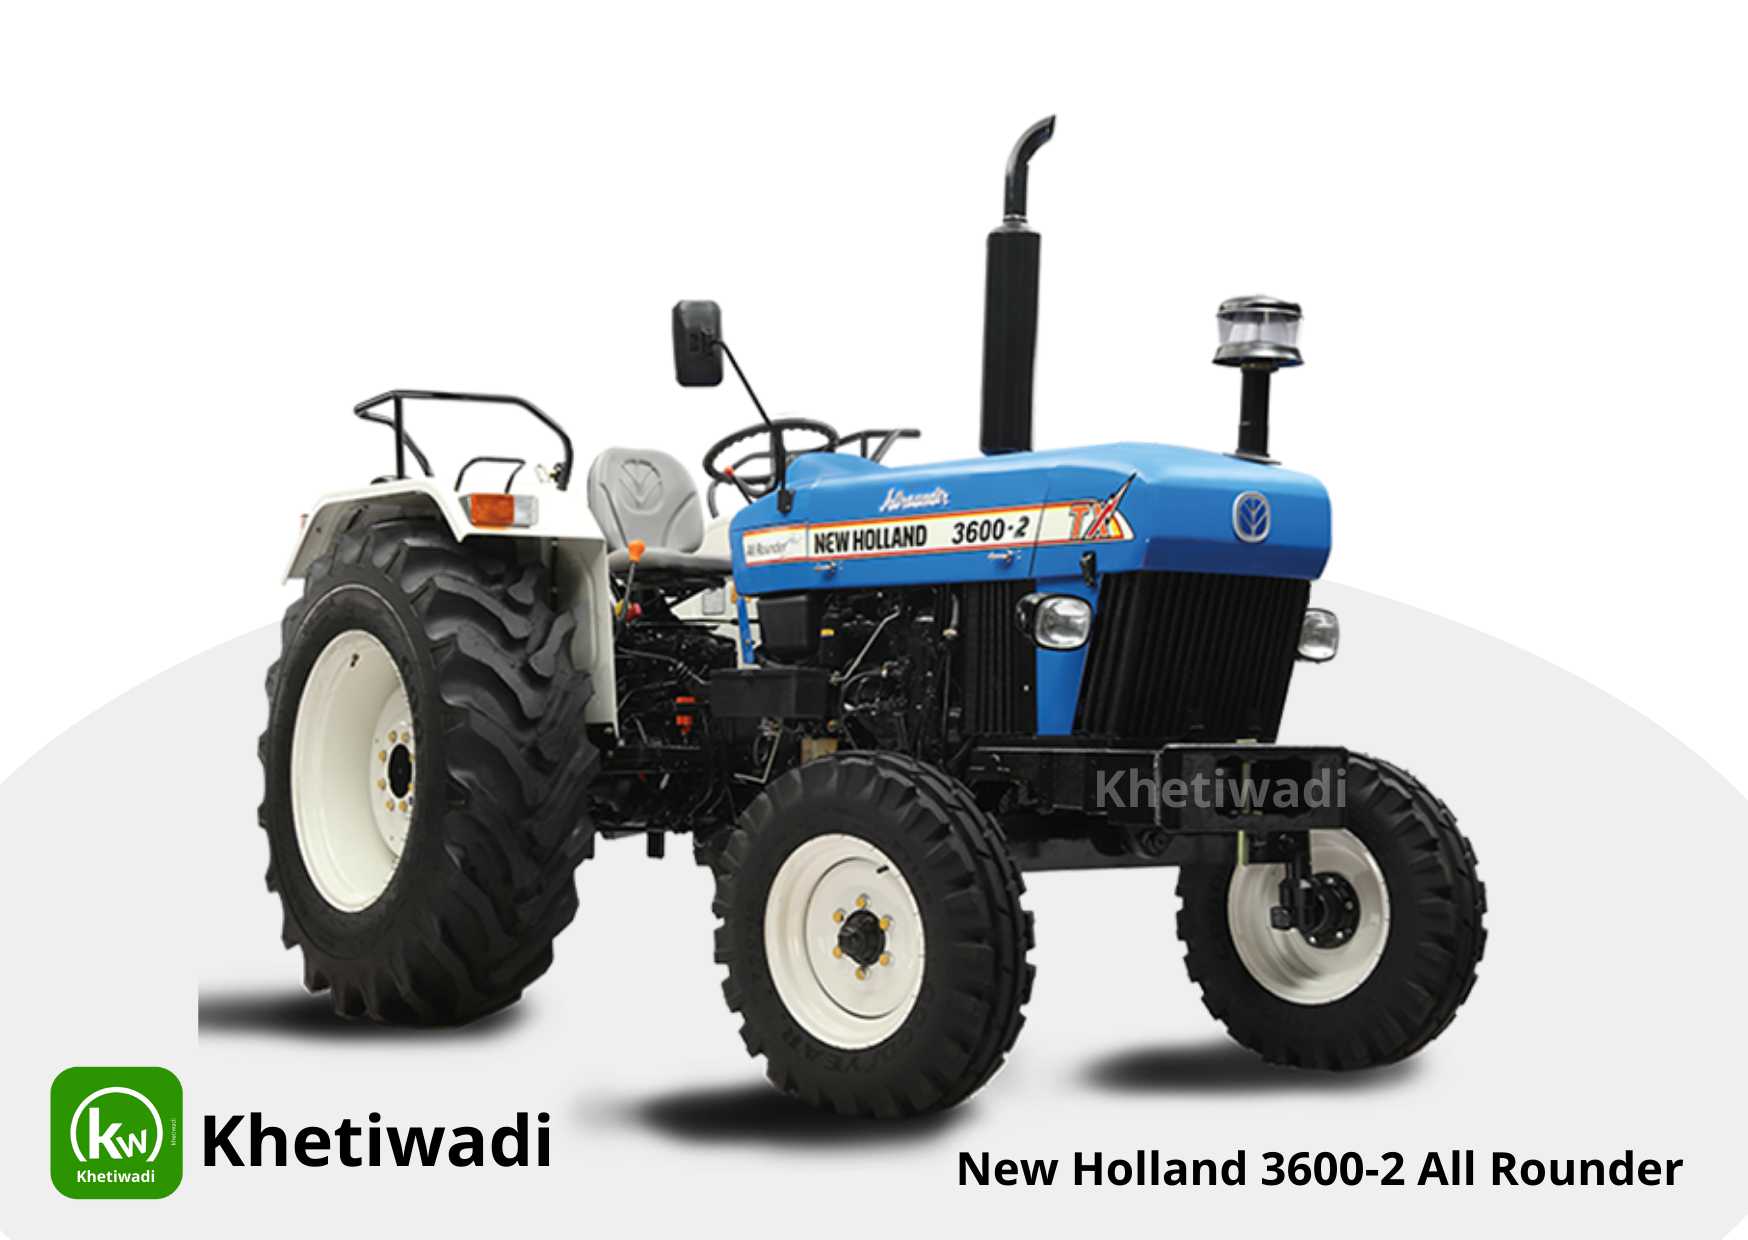 New Holland 3600-2 All Rounder image